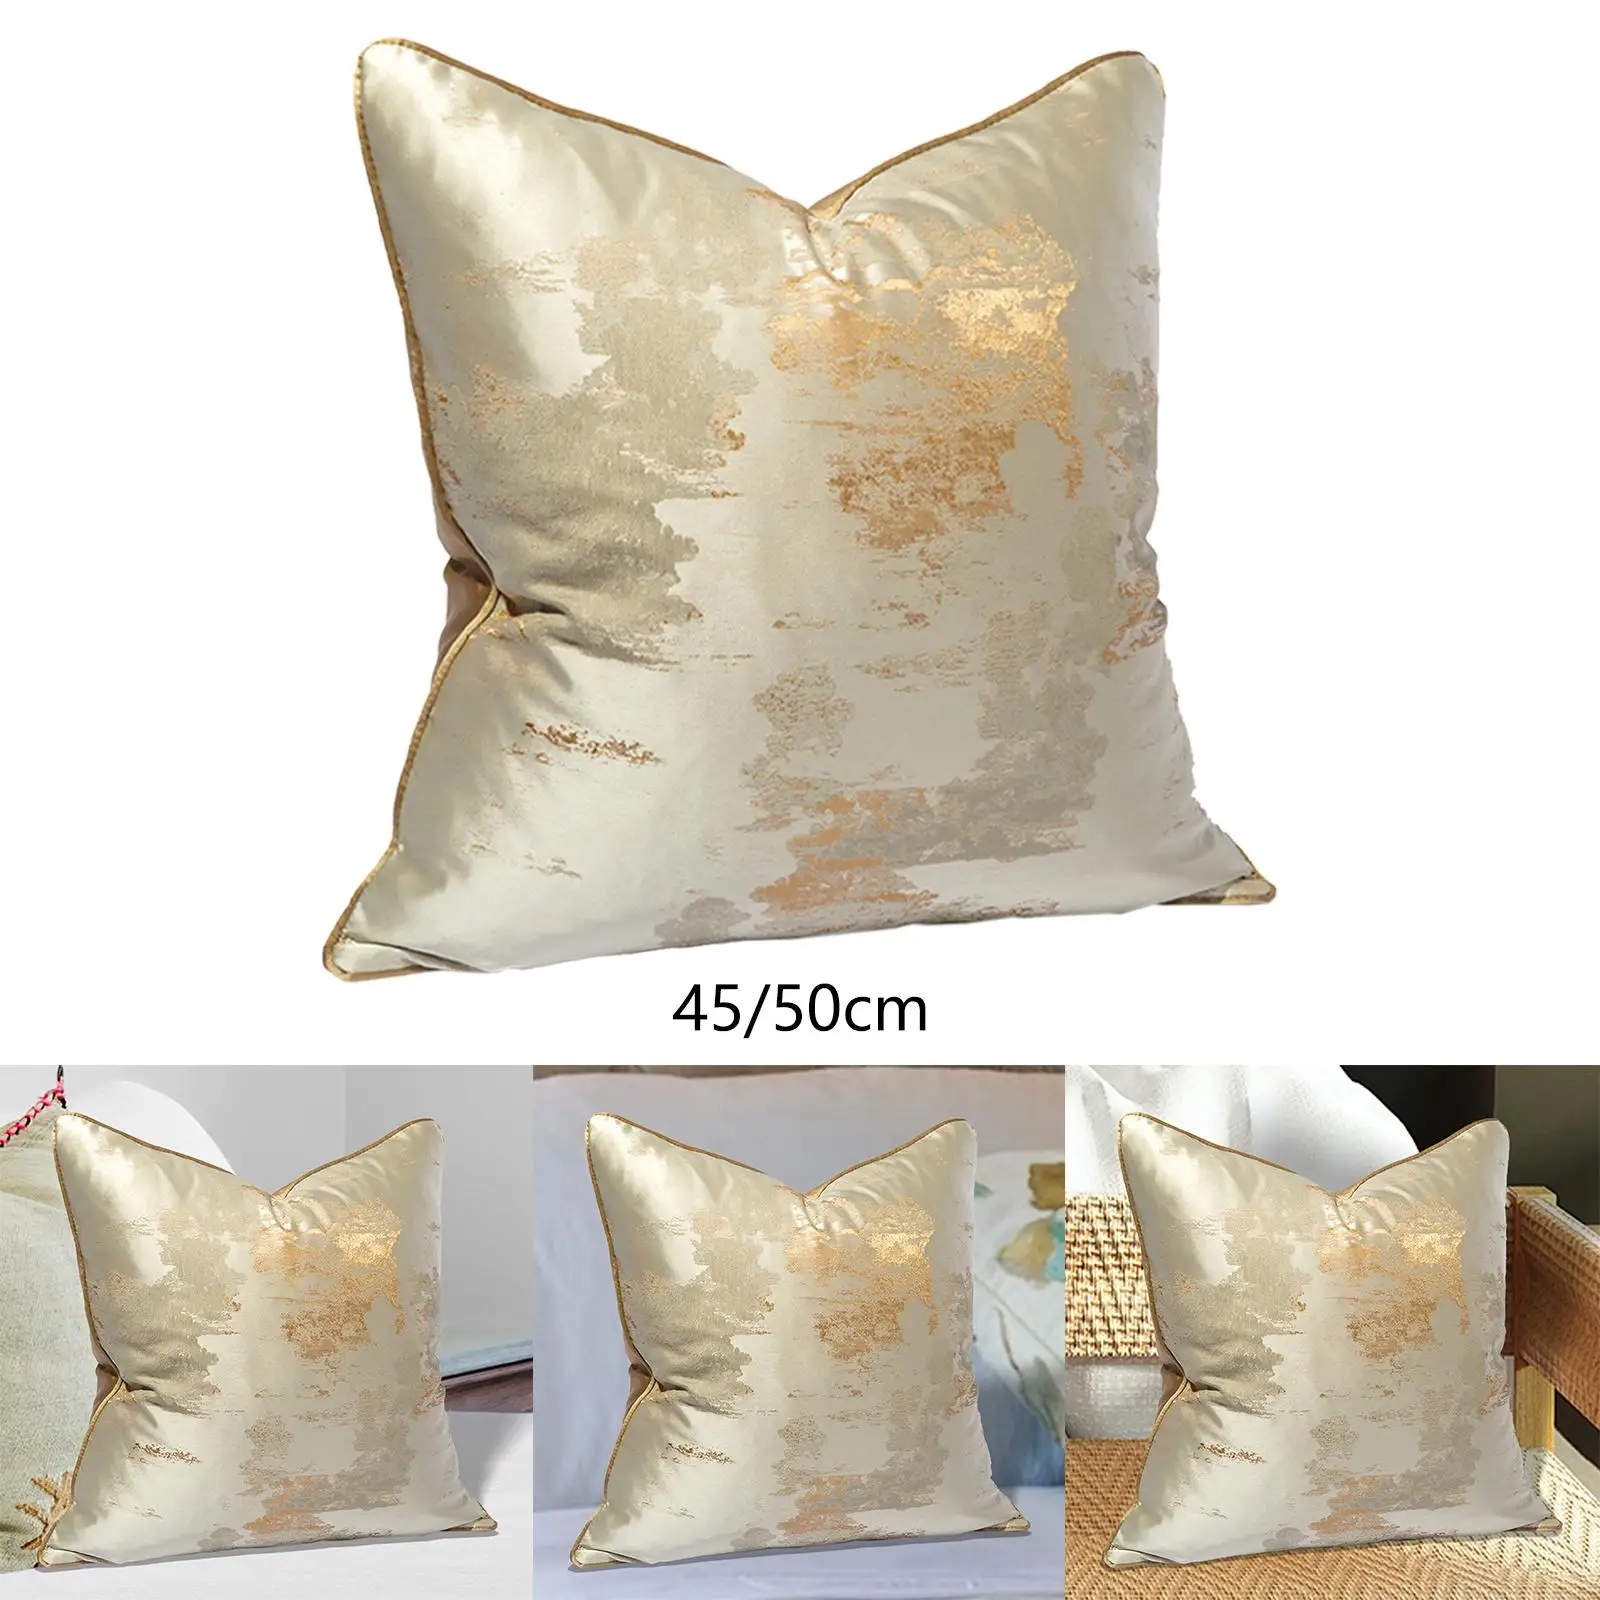 Square Decorative Throw Pillow Cover Bed Couch Comfortable Decoration Home Decor Easily Install Machine Wash